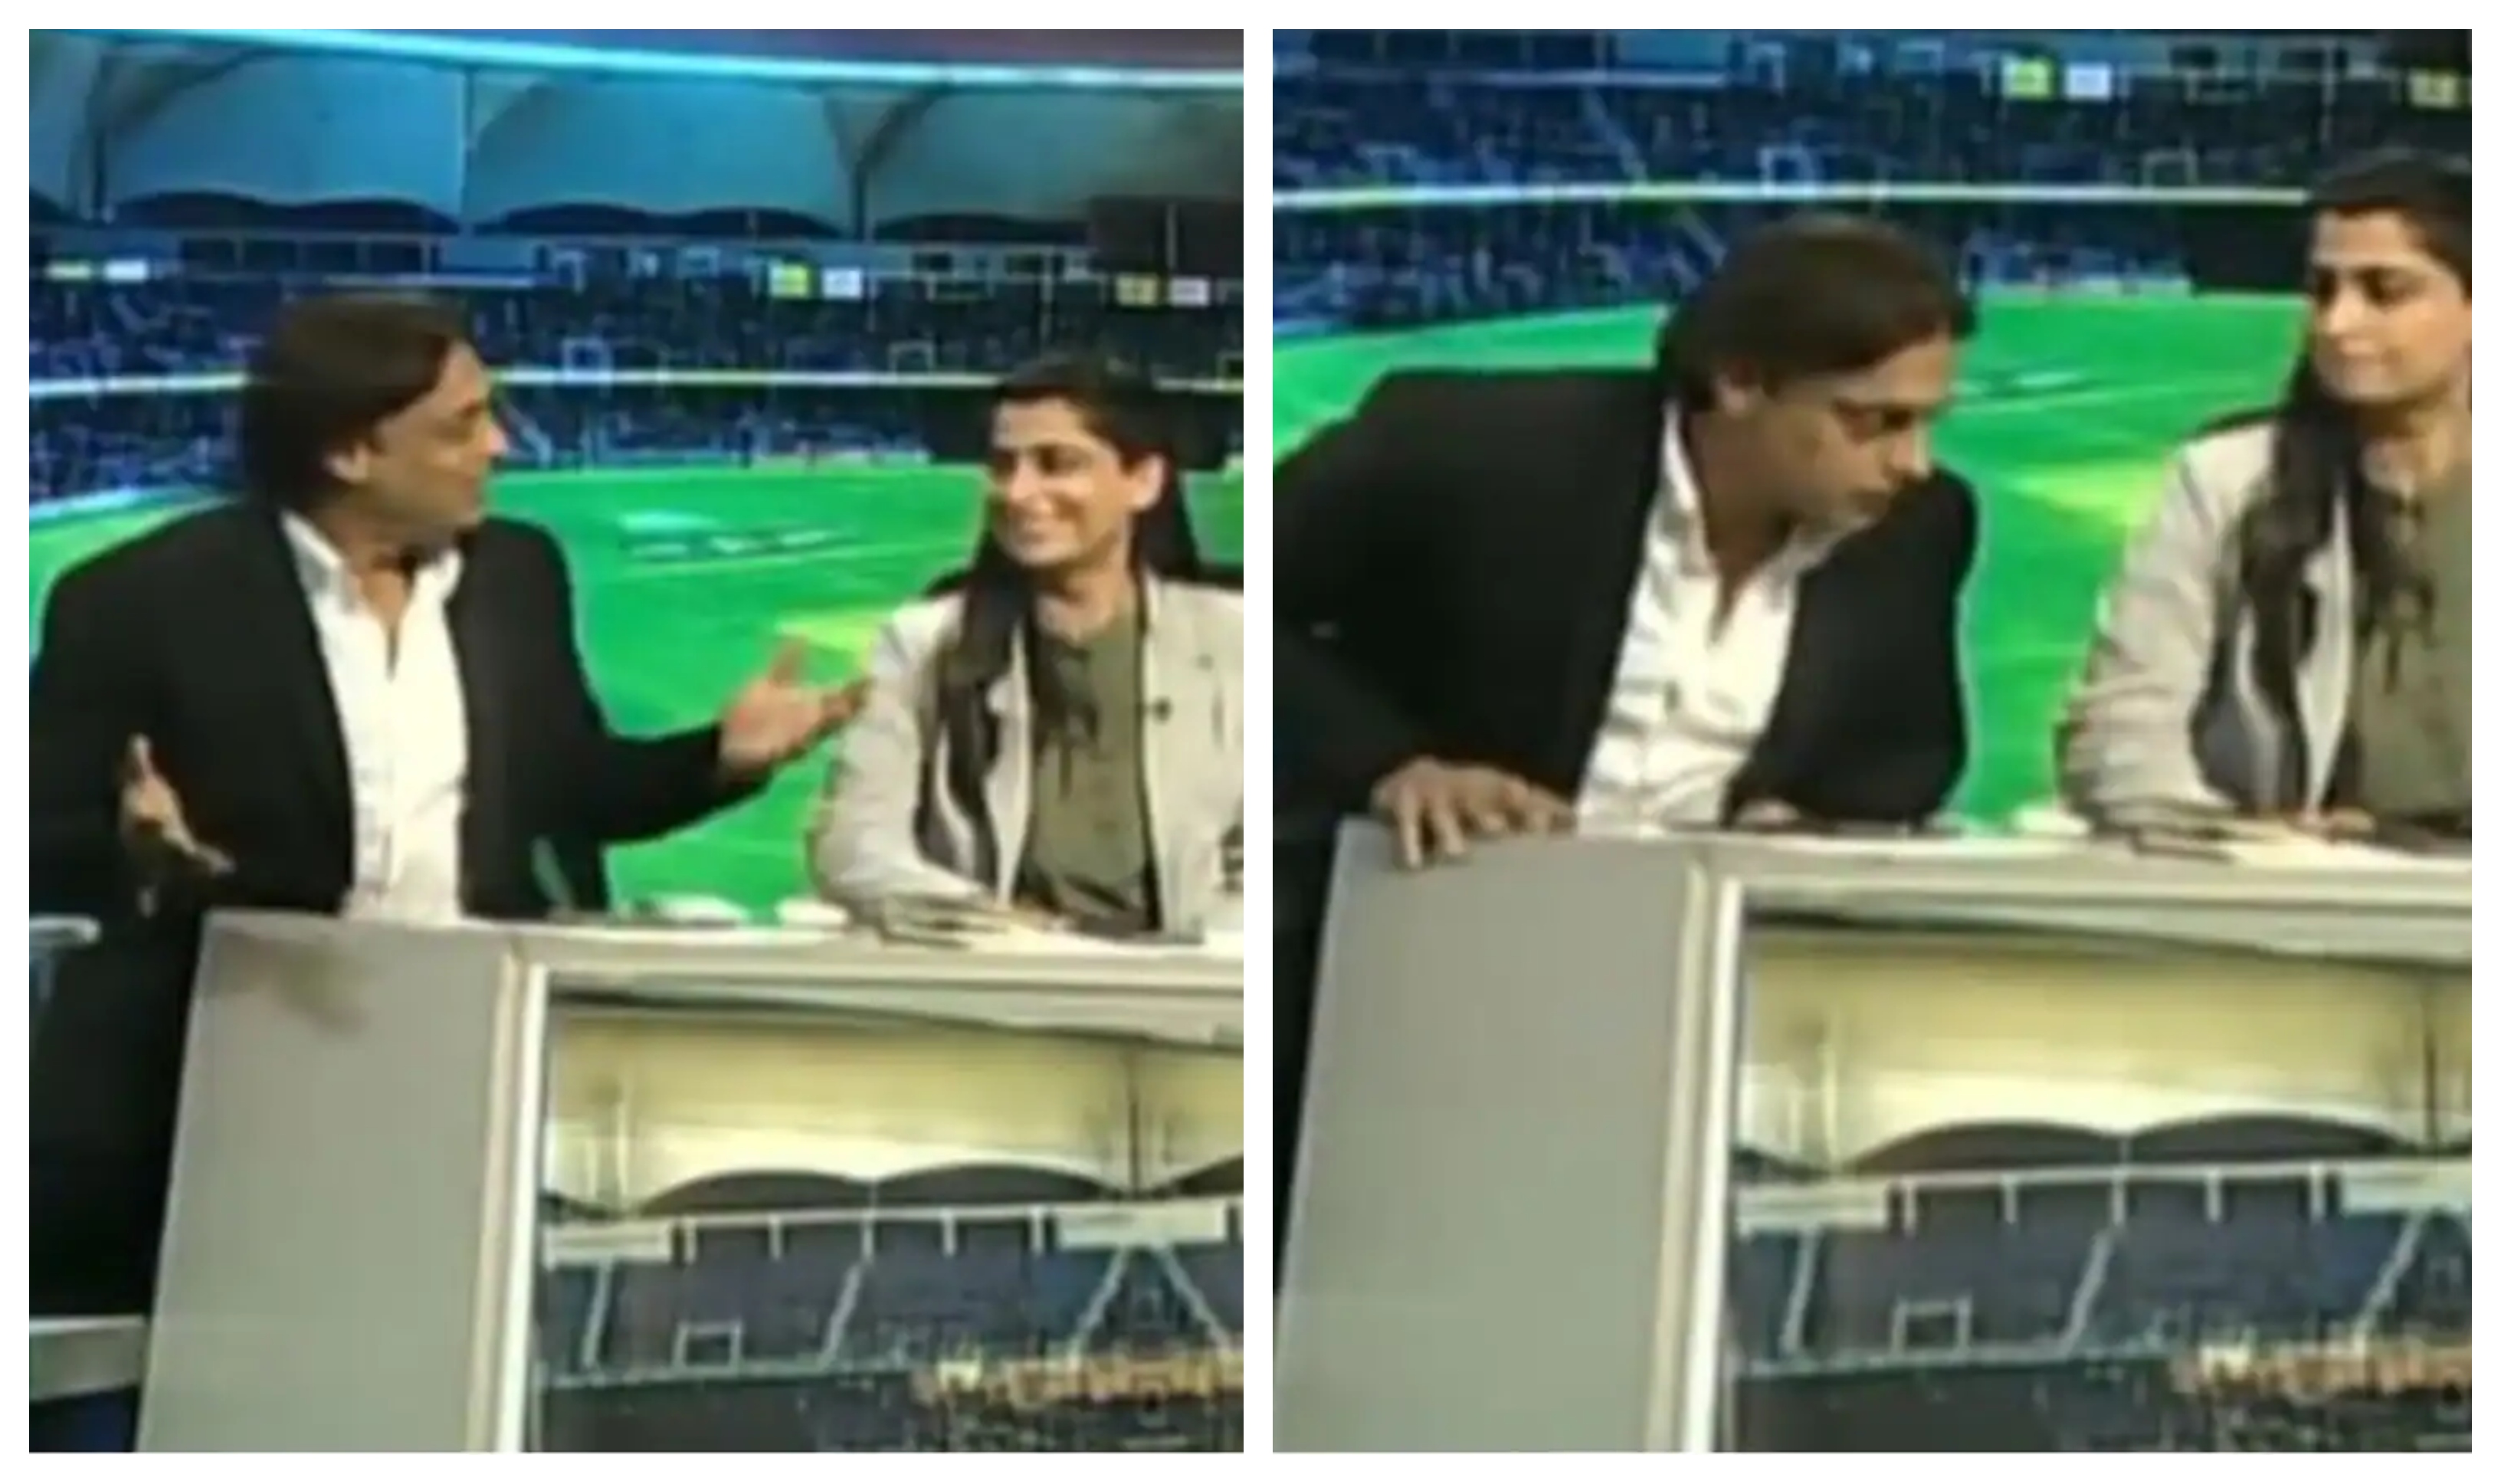 Shoaib Akhtar took off his microphone and left | Screengrab